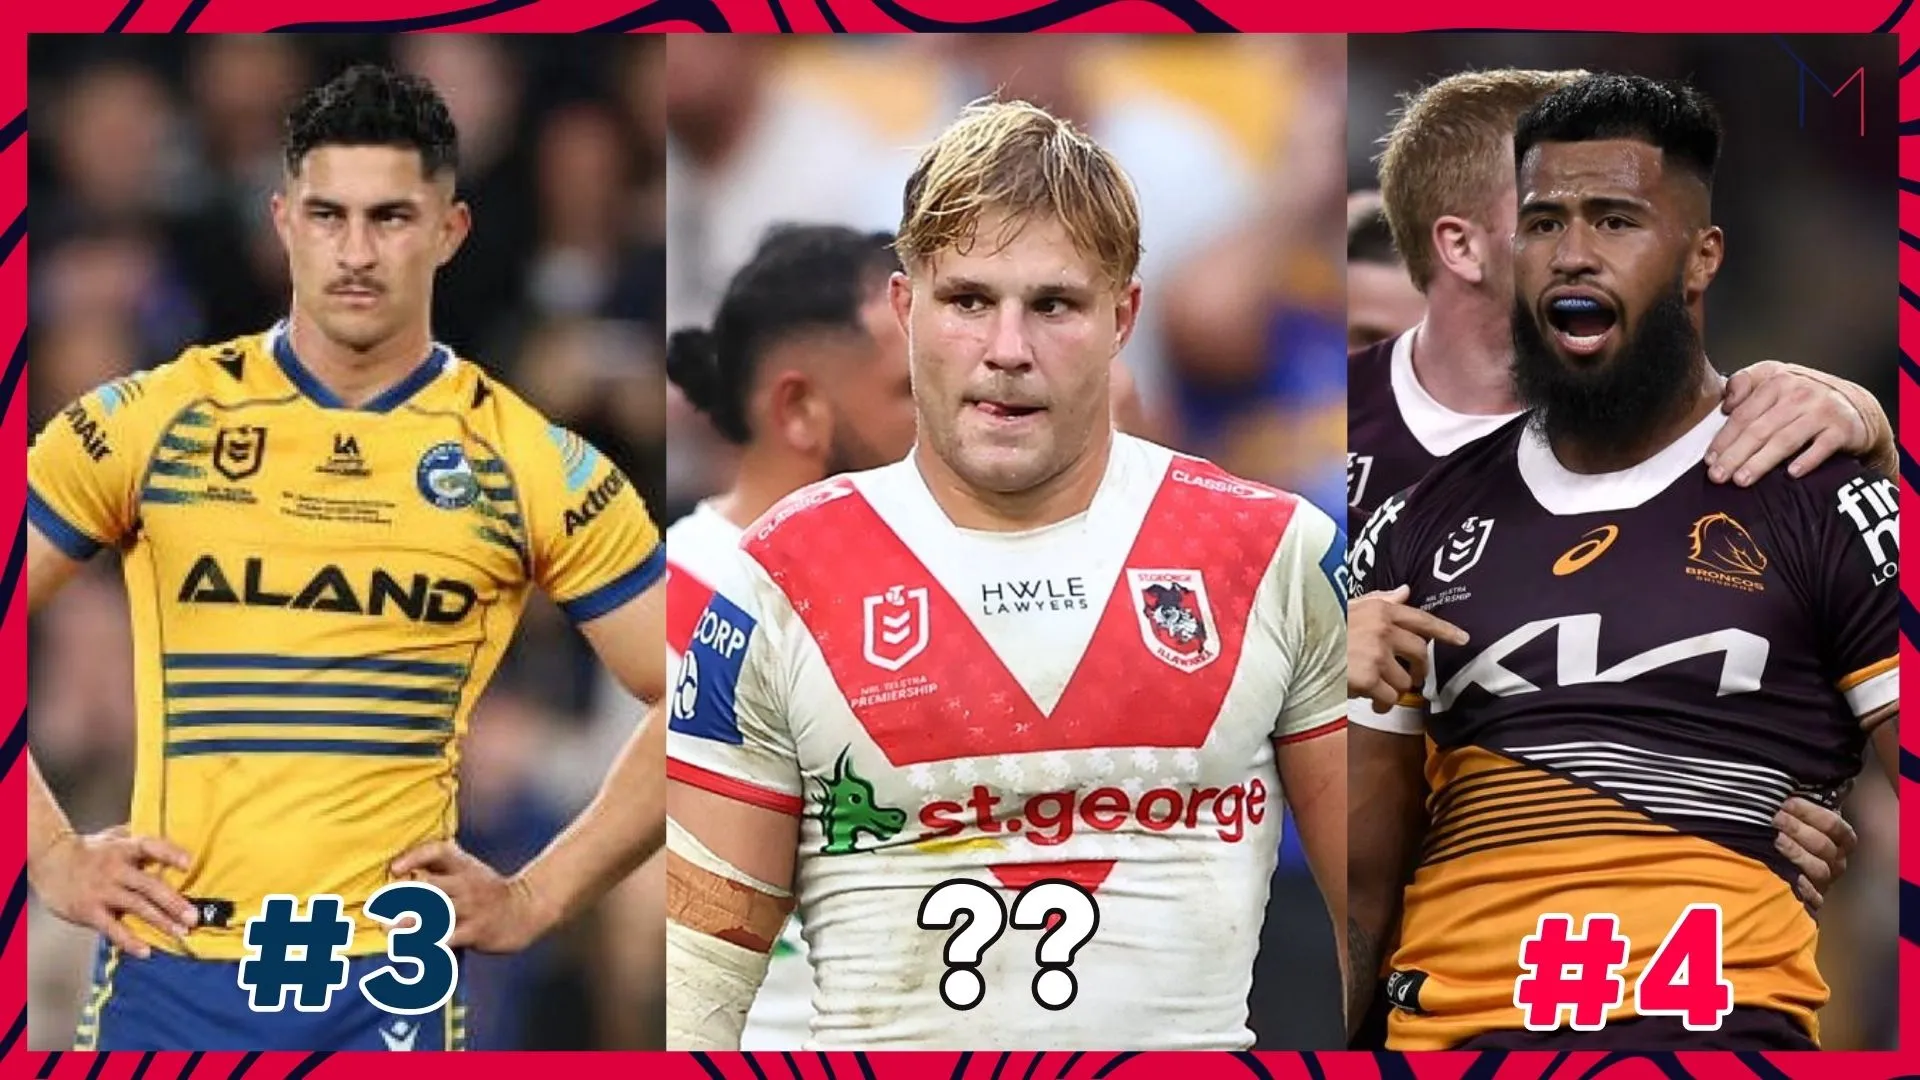 Top 10 most popular NRL teams in the world - Popular teams in the NRL